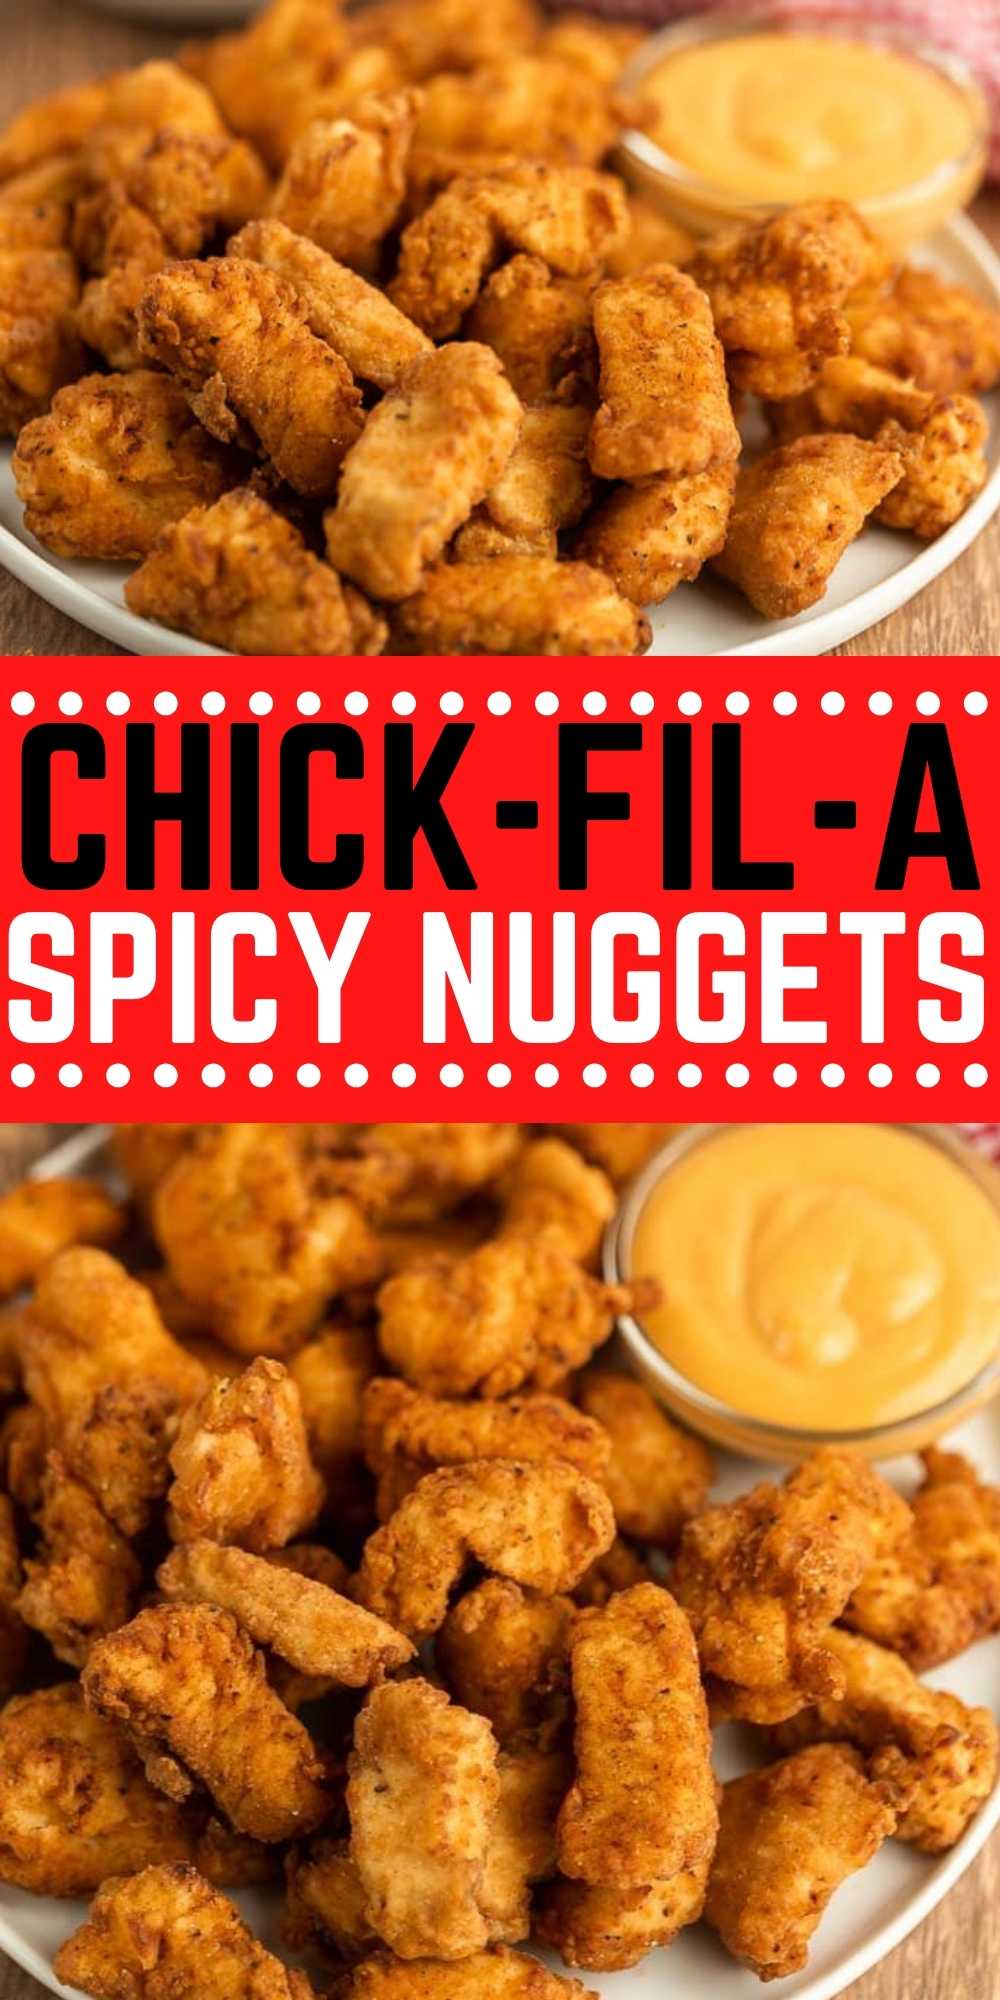 These Chick-Fil-A Spicy Nuggets Recipe is easy to make at home. This copycat spicy nuggets recipe has easy ingredients and taste amazing. The entire family will love these easy to make Spicy Chick-Fil-A nuggets recipe.  #eatingonadime #chickenrecipes #copycatrecipes #chickfilarecipes #easyrecipes 
